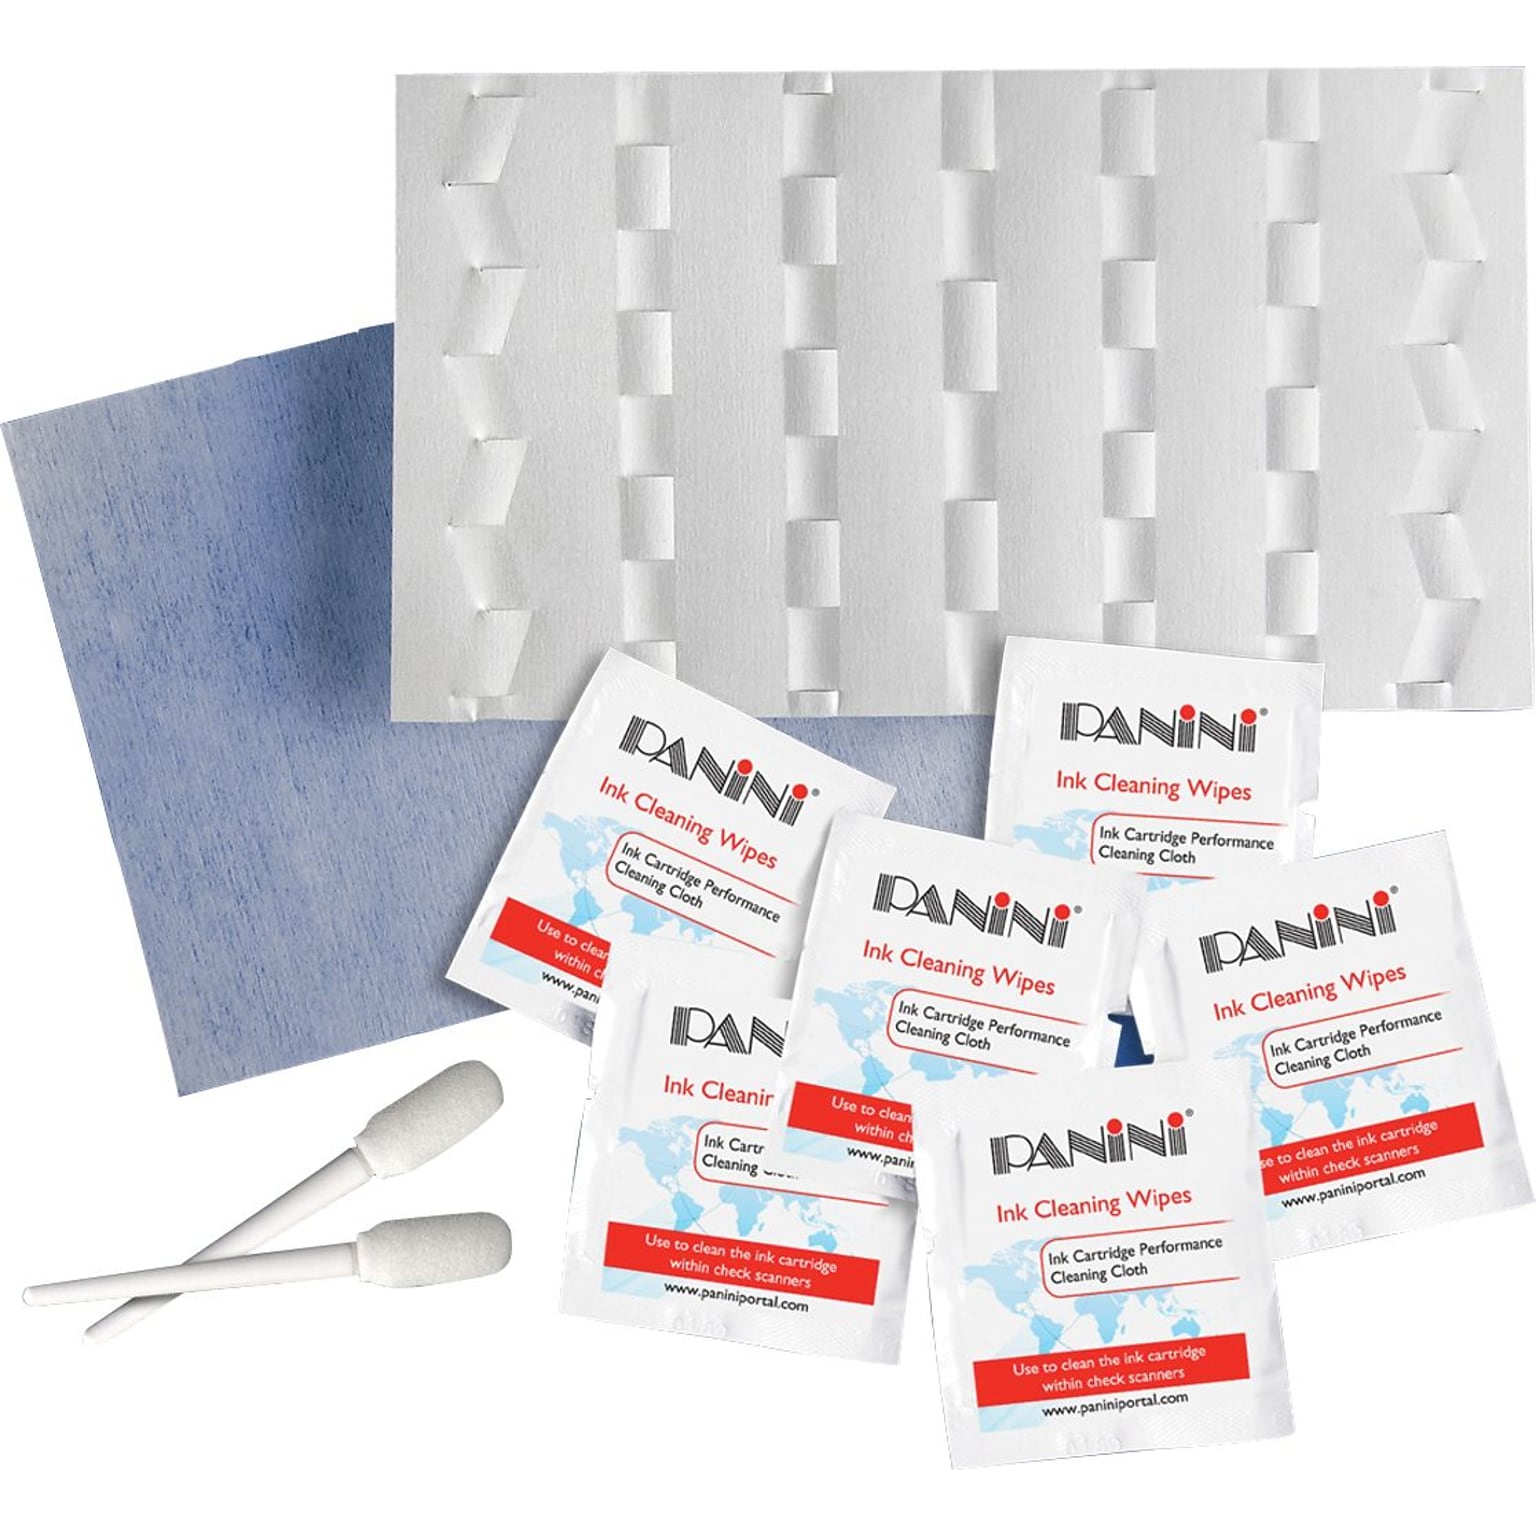 Panini Vision X / My Vison X Cleaning Kit, 25 Cards, 6 swabs, and 1 pack wipes per Kit